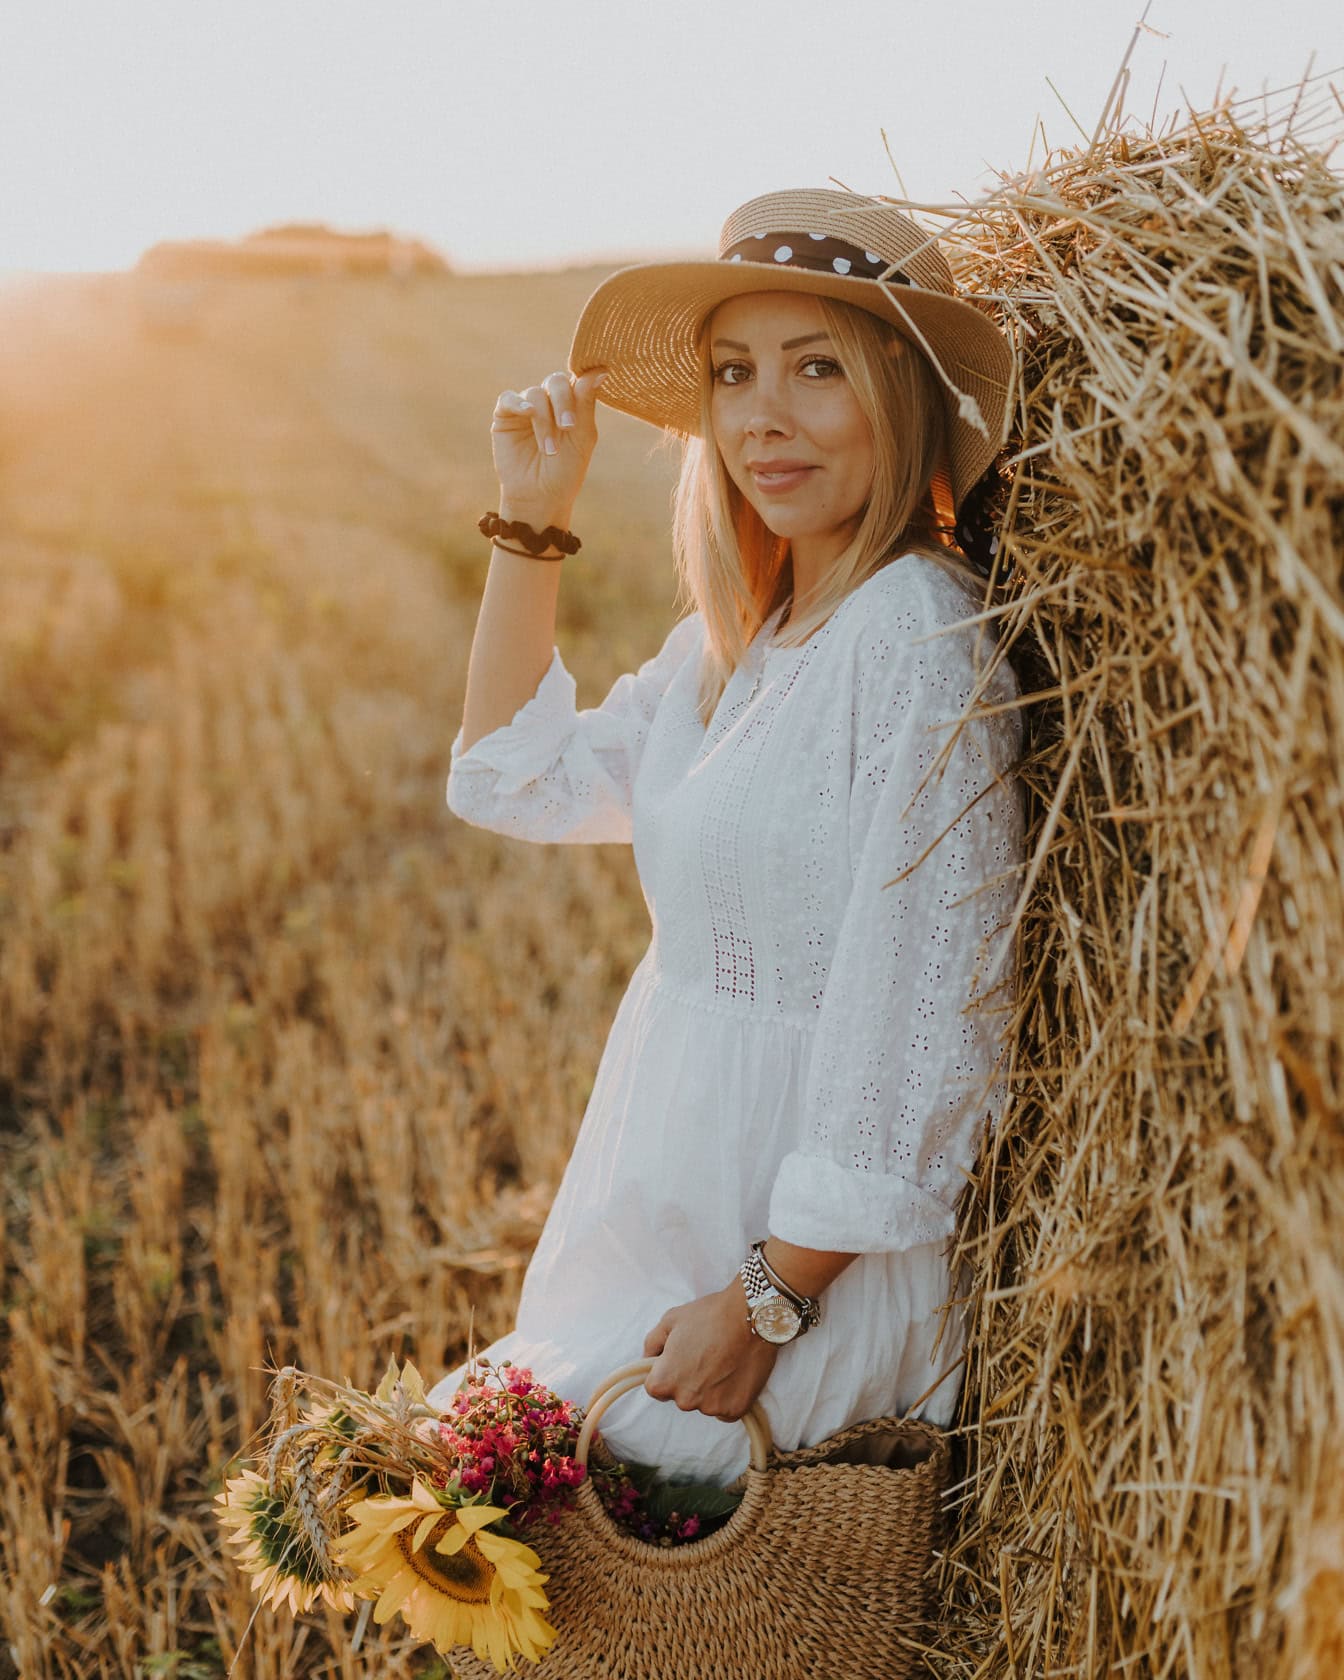 Portrait of a cowgirl in a country-style white dress and straw hat while she leaning against a haystack in a sunny field